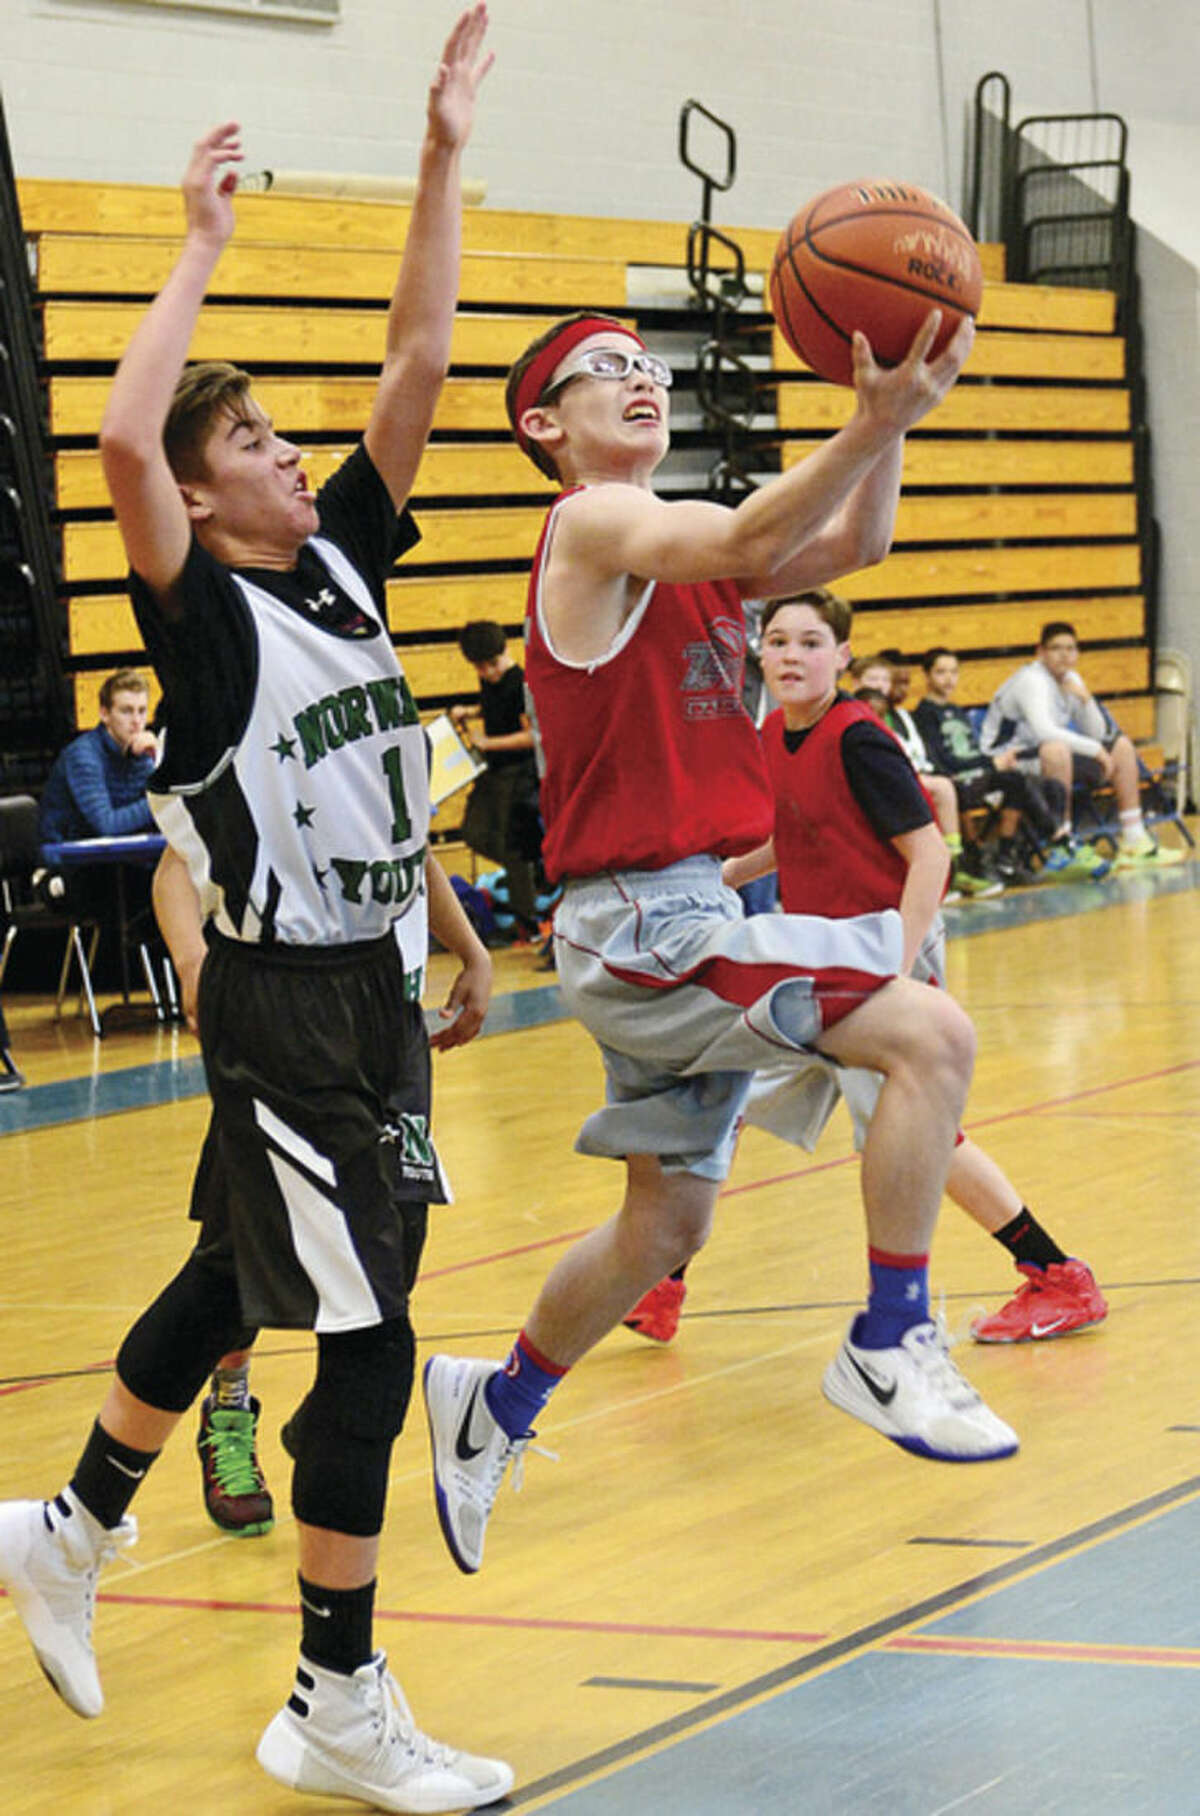 Hour photo / Erik Trautmann Austin Hall of TMT, right, puts up a shot as Peter Meyerson of Norwalk Youth defends during the seventh grade championship game of the Fairfield County Basketball League on Saturday at Ridgefield High. TMT defeated Youth 55-46 to claim the title.